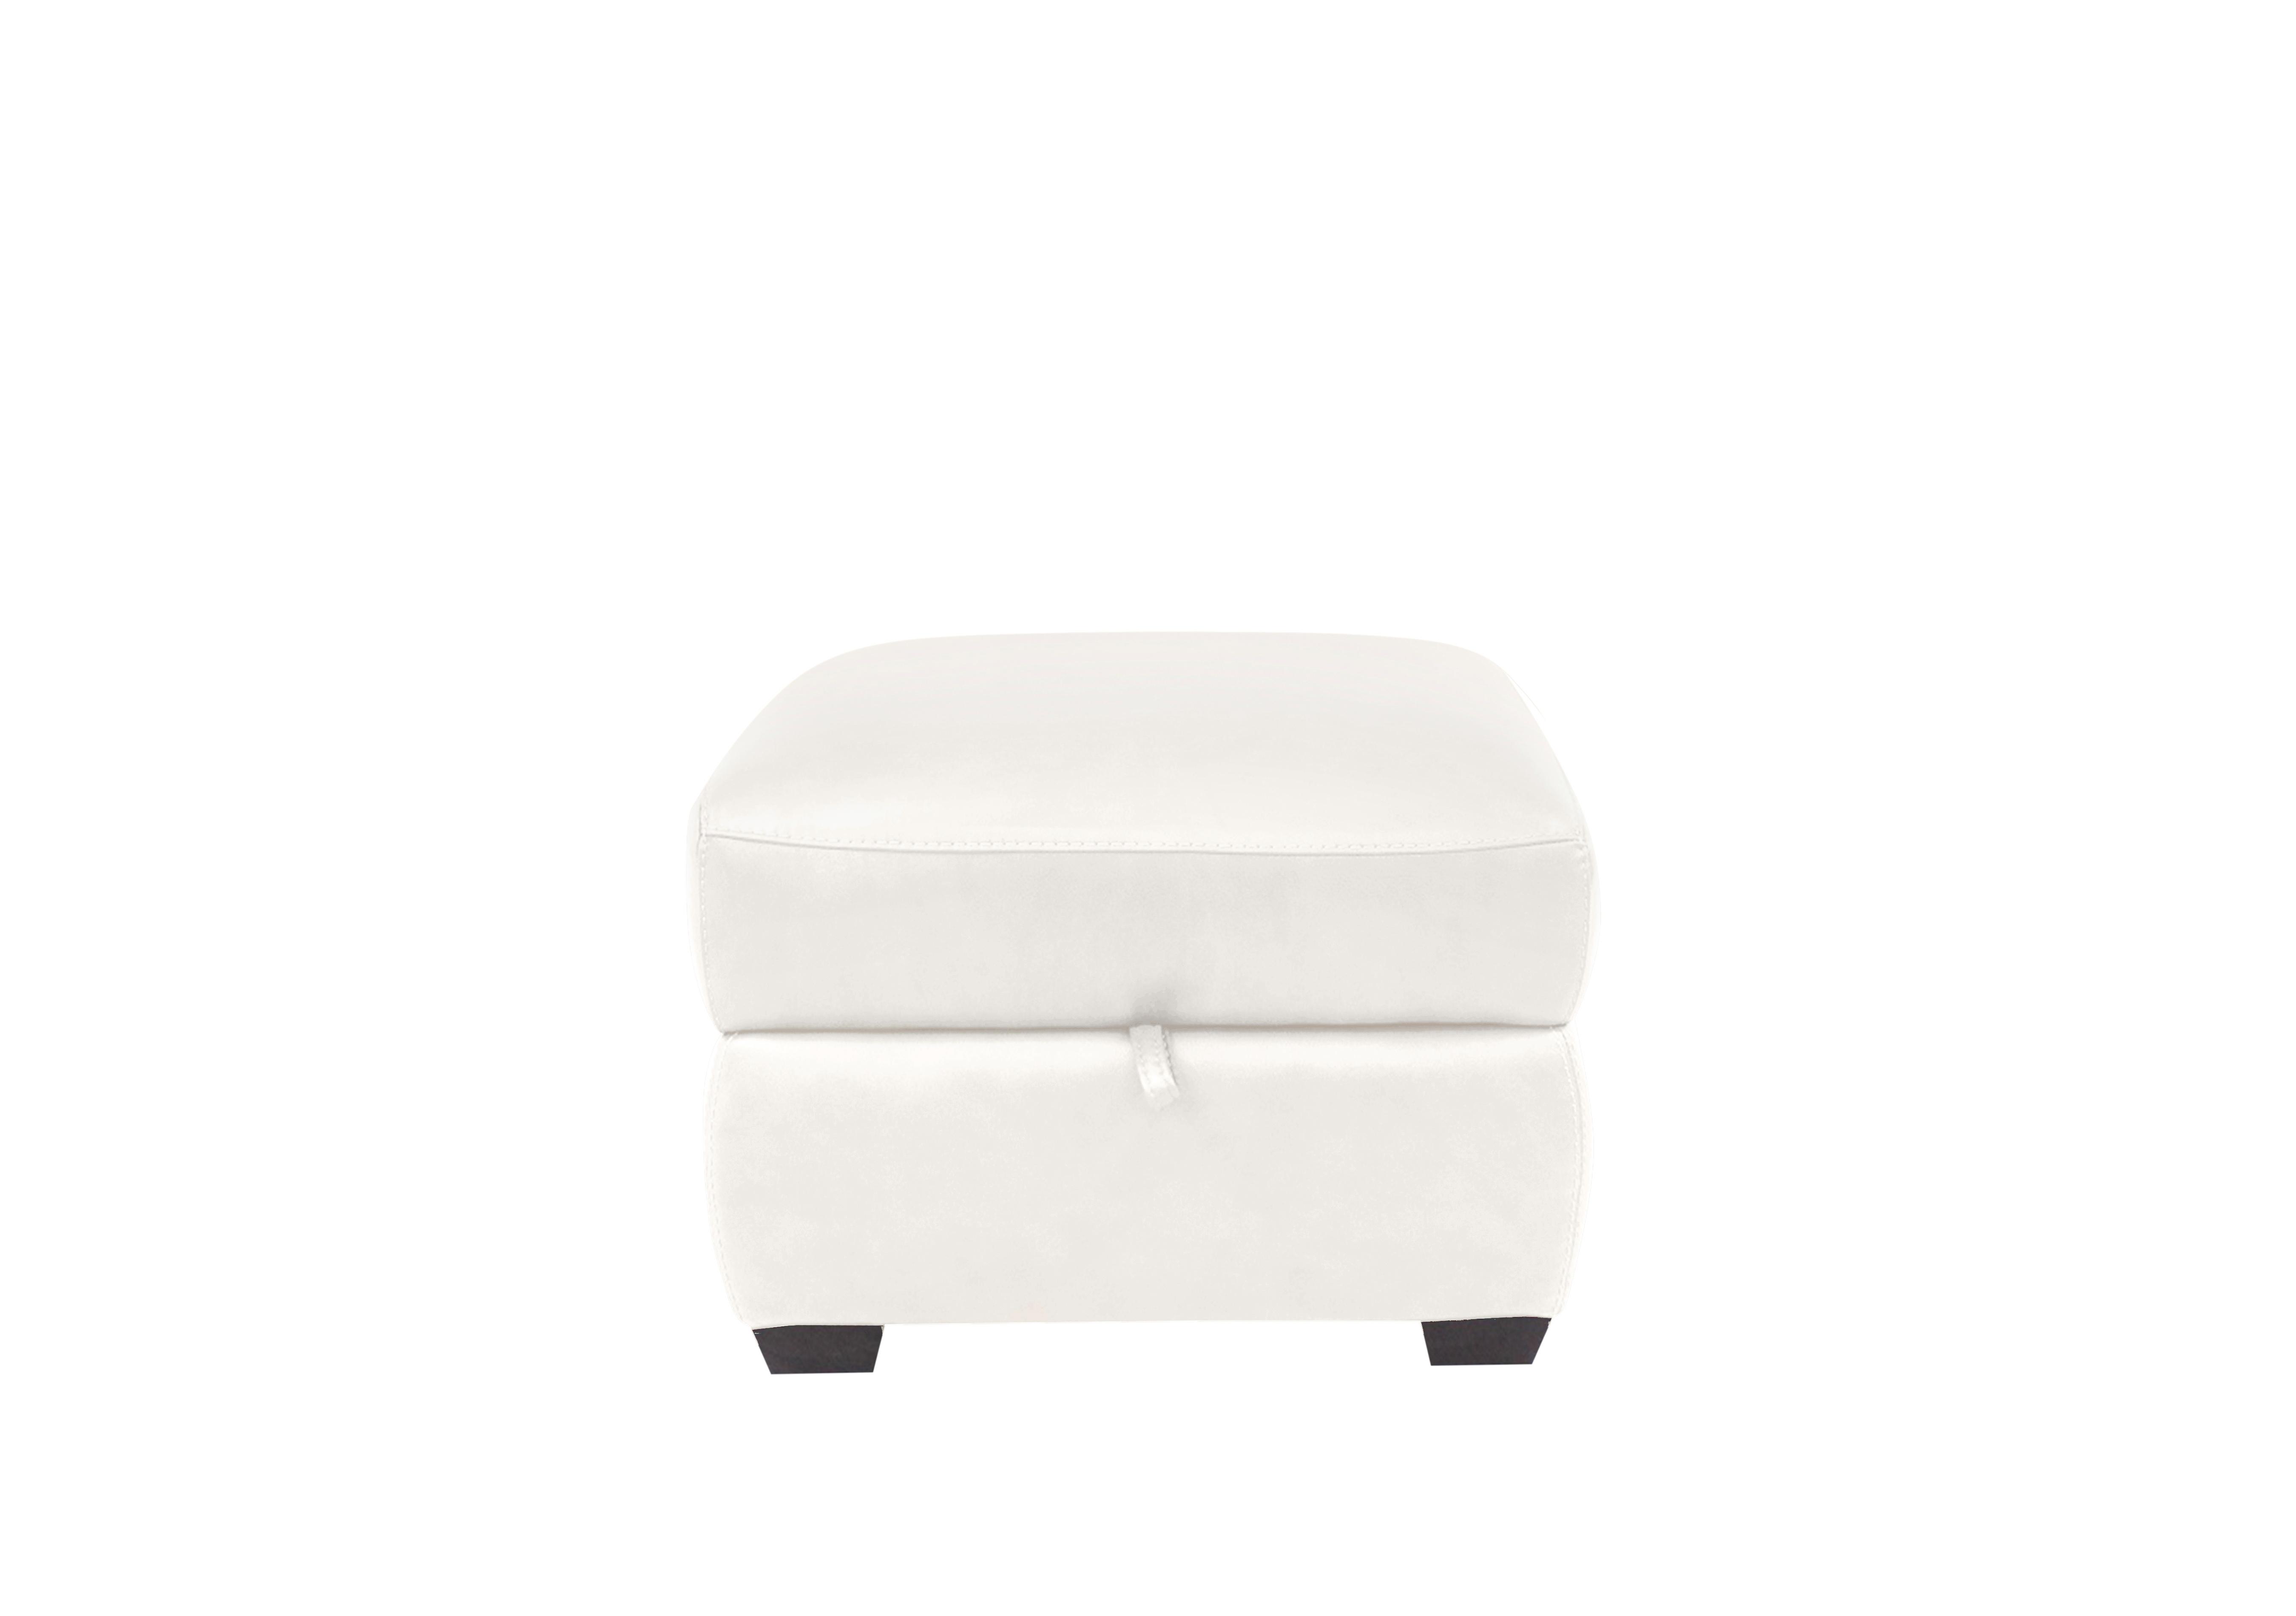 Cozee Leather Storage Stool in Bv-744d Star White on Furniture Village